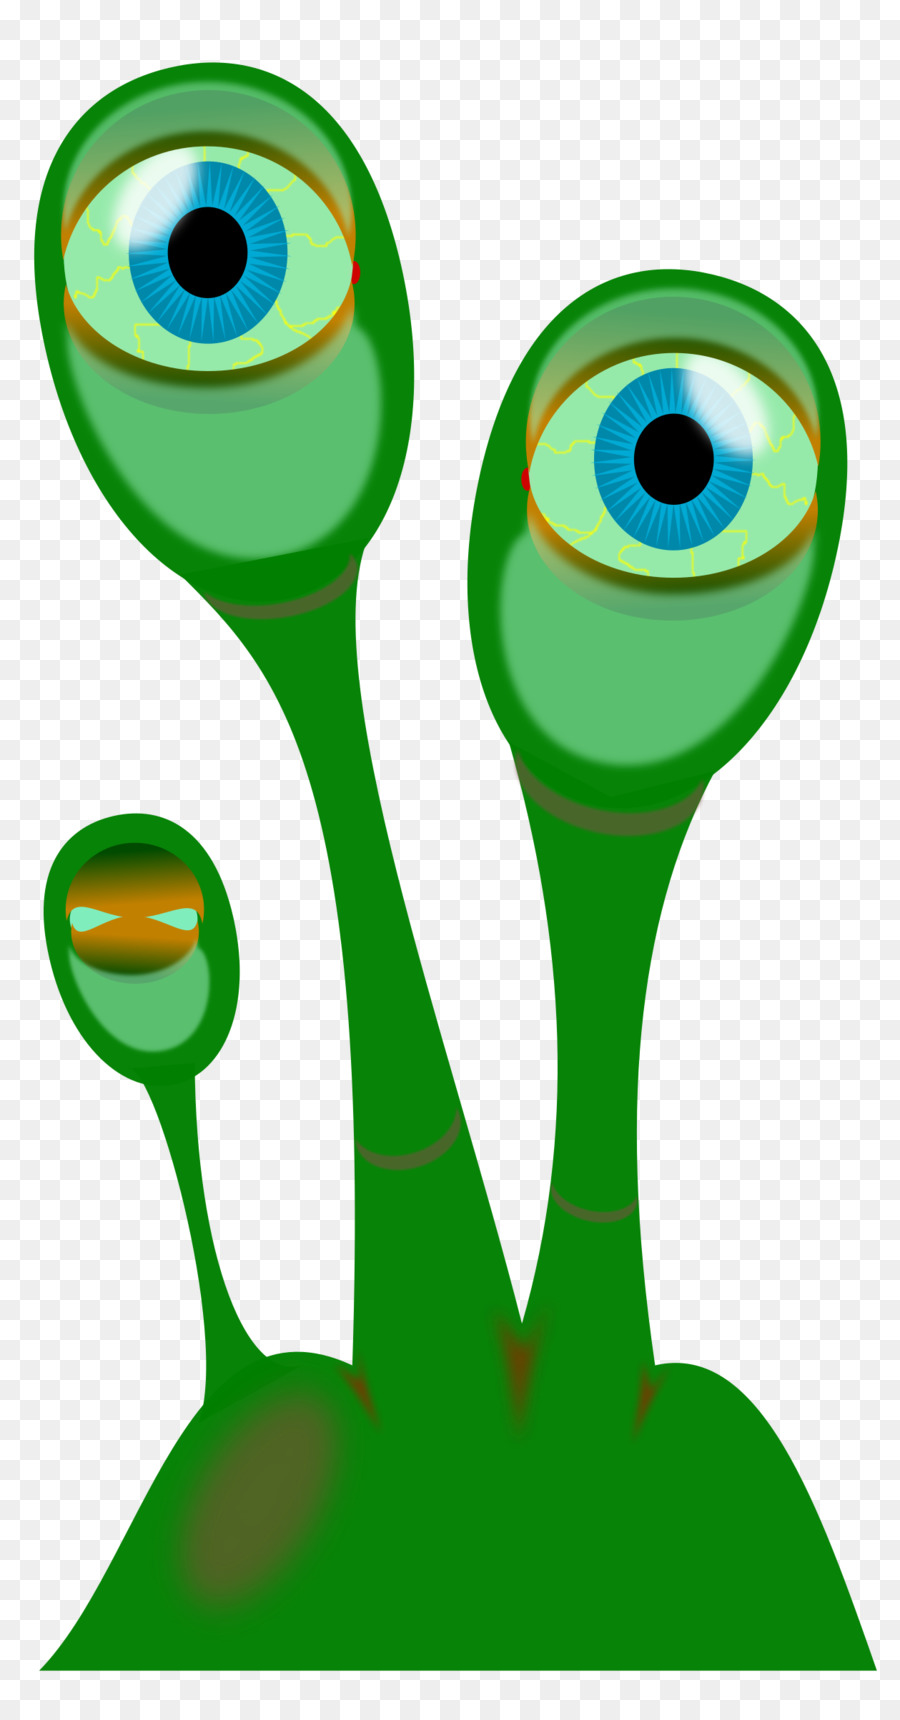 YouTube Clip art - Alien png download - 1259*2400 - Free Transparent Youtube png Download.